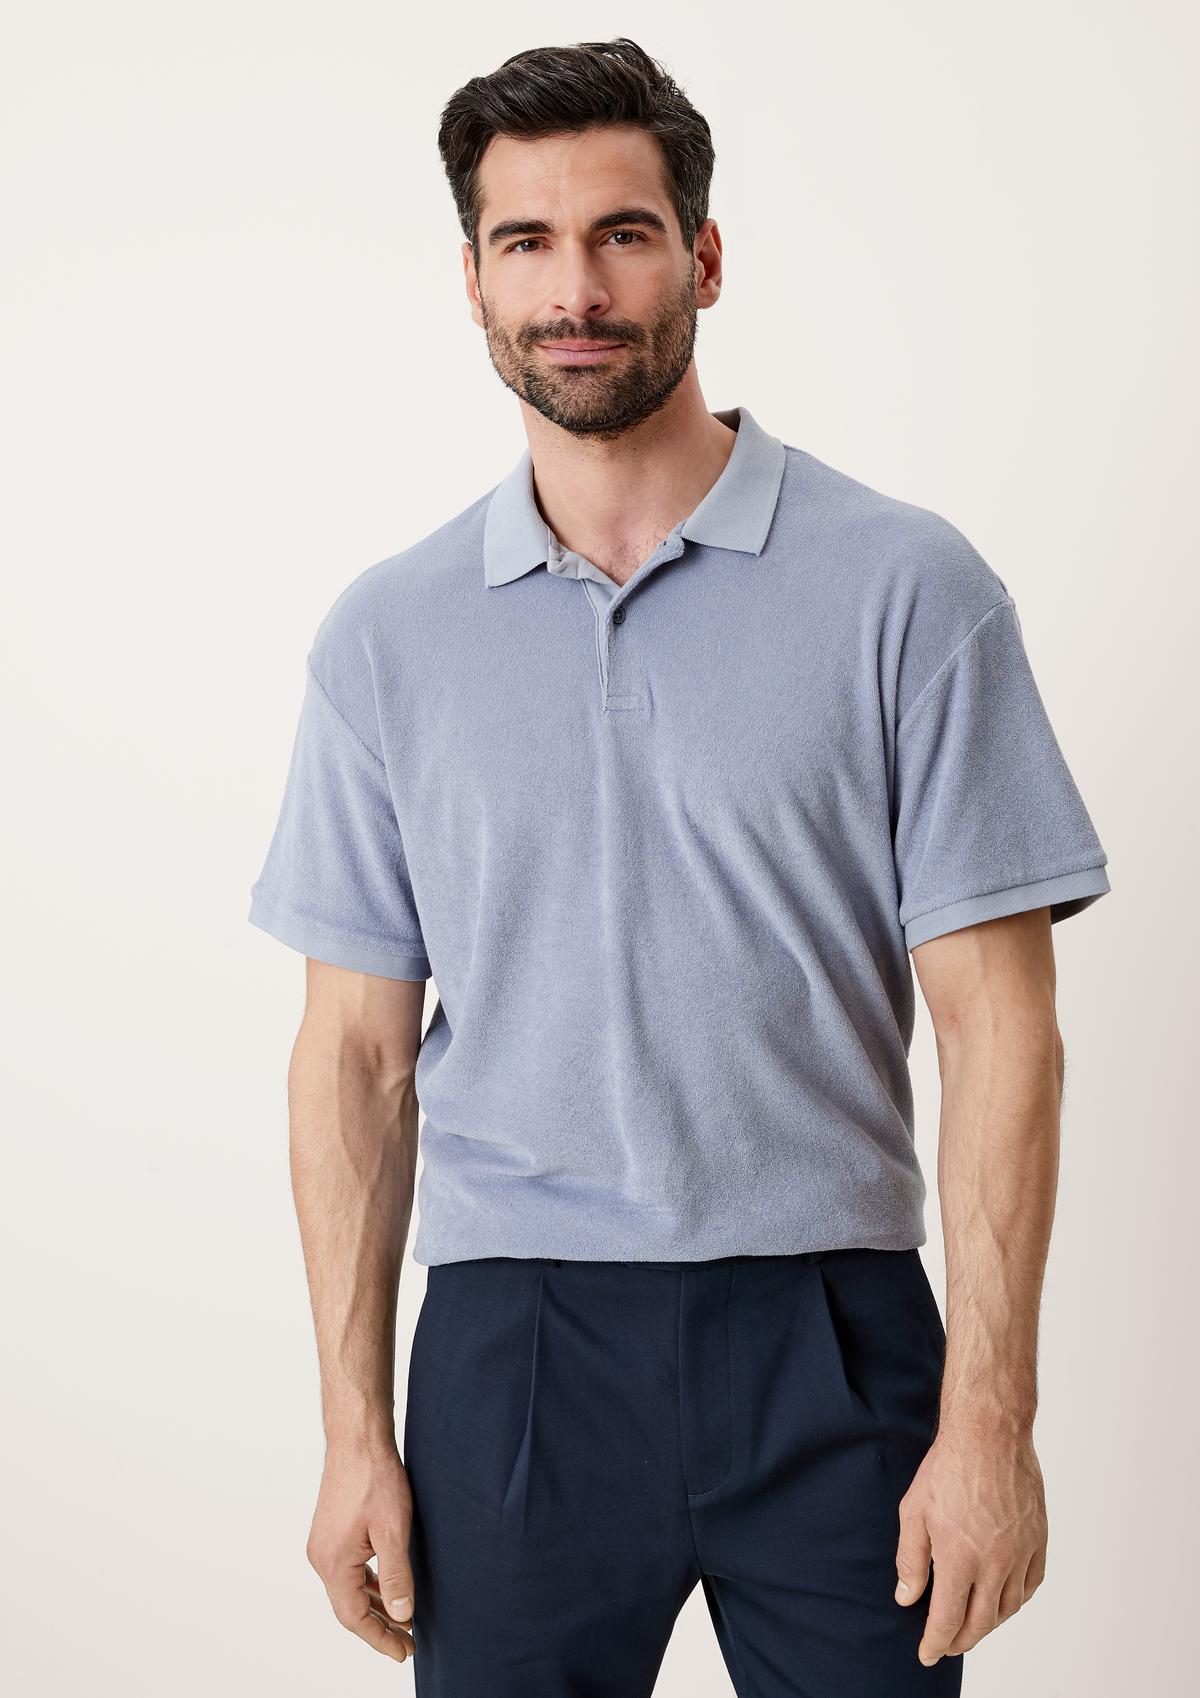 s.Oliver Polo shirt made of terrycloth fabric